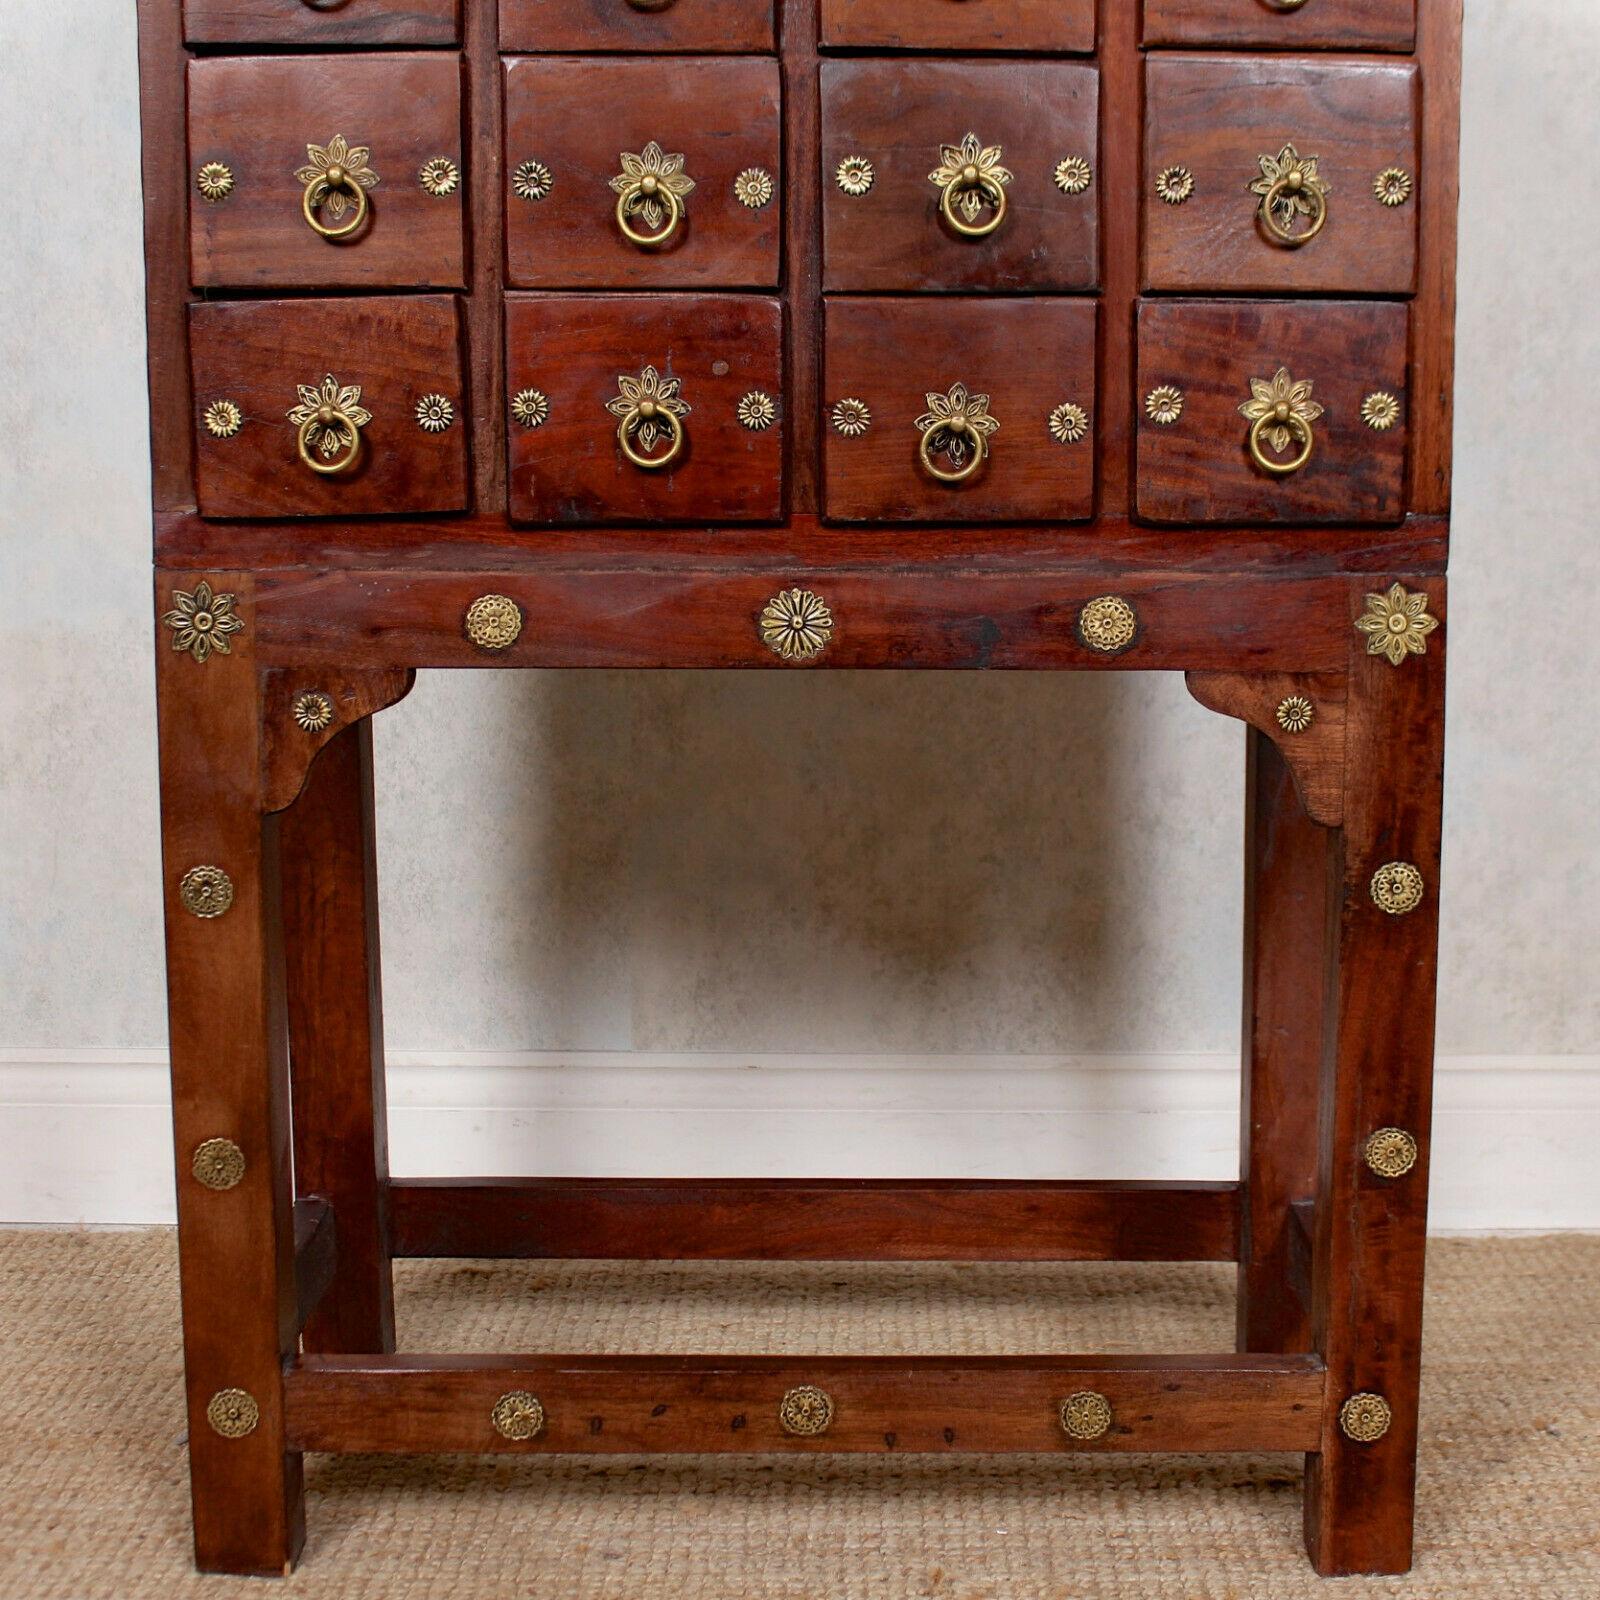 Chinese Apothecary Cabinet Spice Chest Haberdashery Oriental Hardwood In Good Condition For Sale In Newcastle upon Tyne, GB